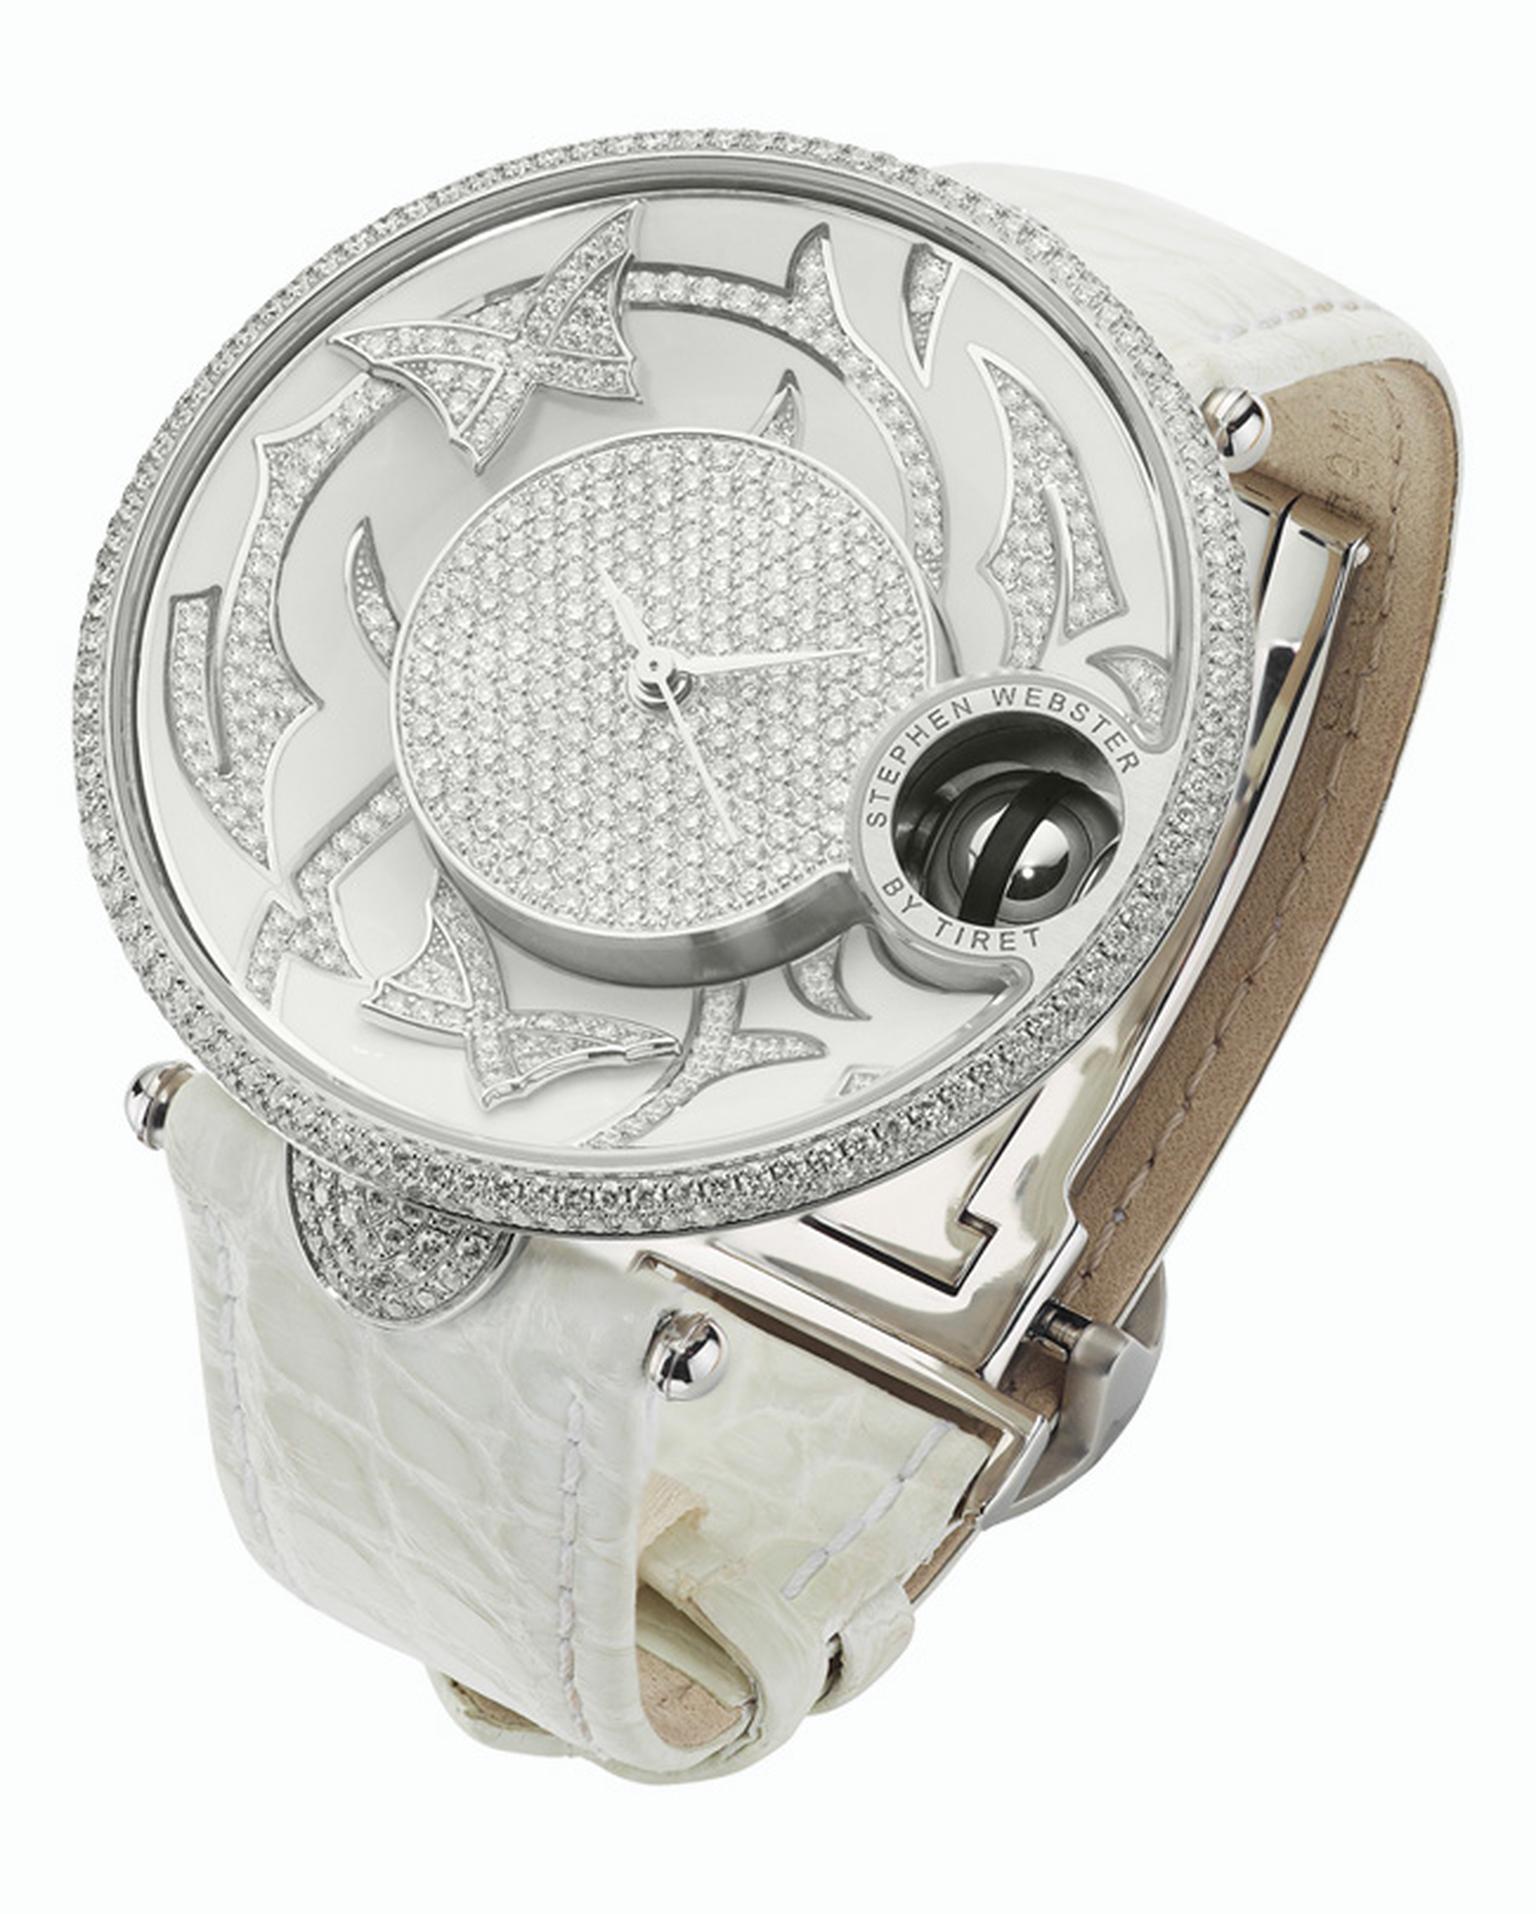 Stephen Webster Fly by Night with Tiret watch with white diamonds_20140110_Main